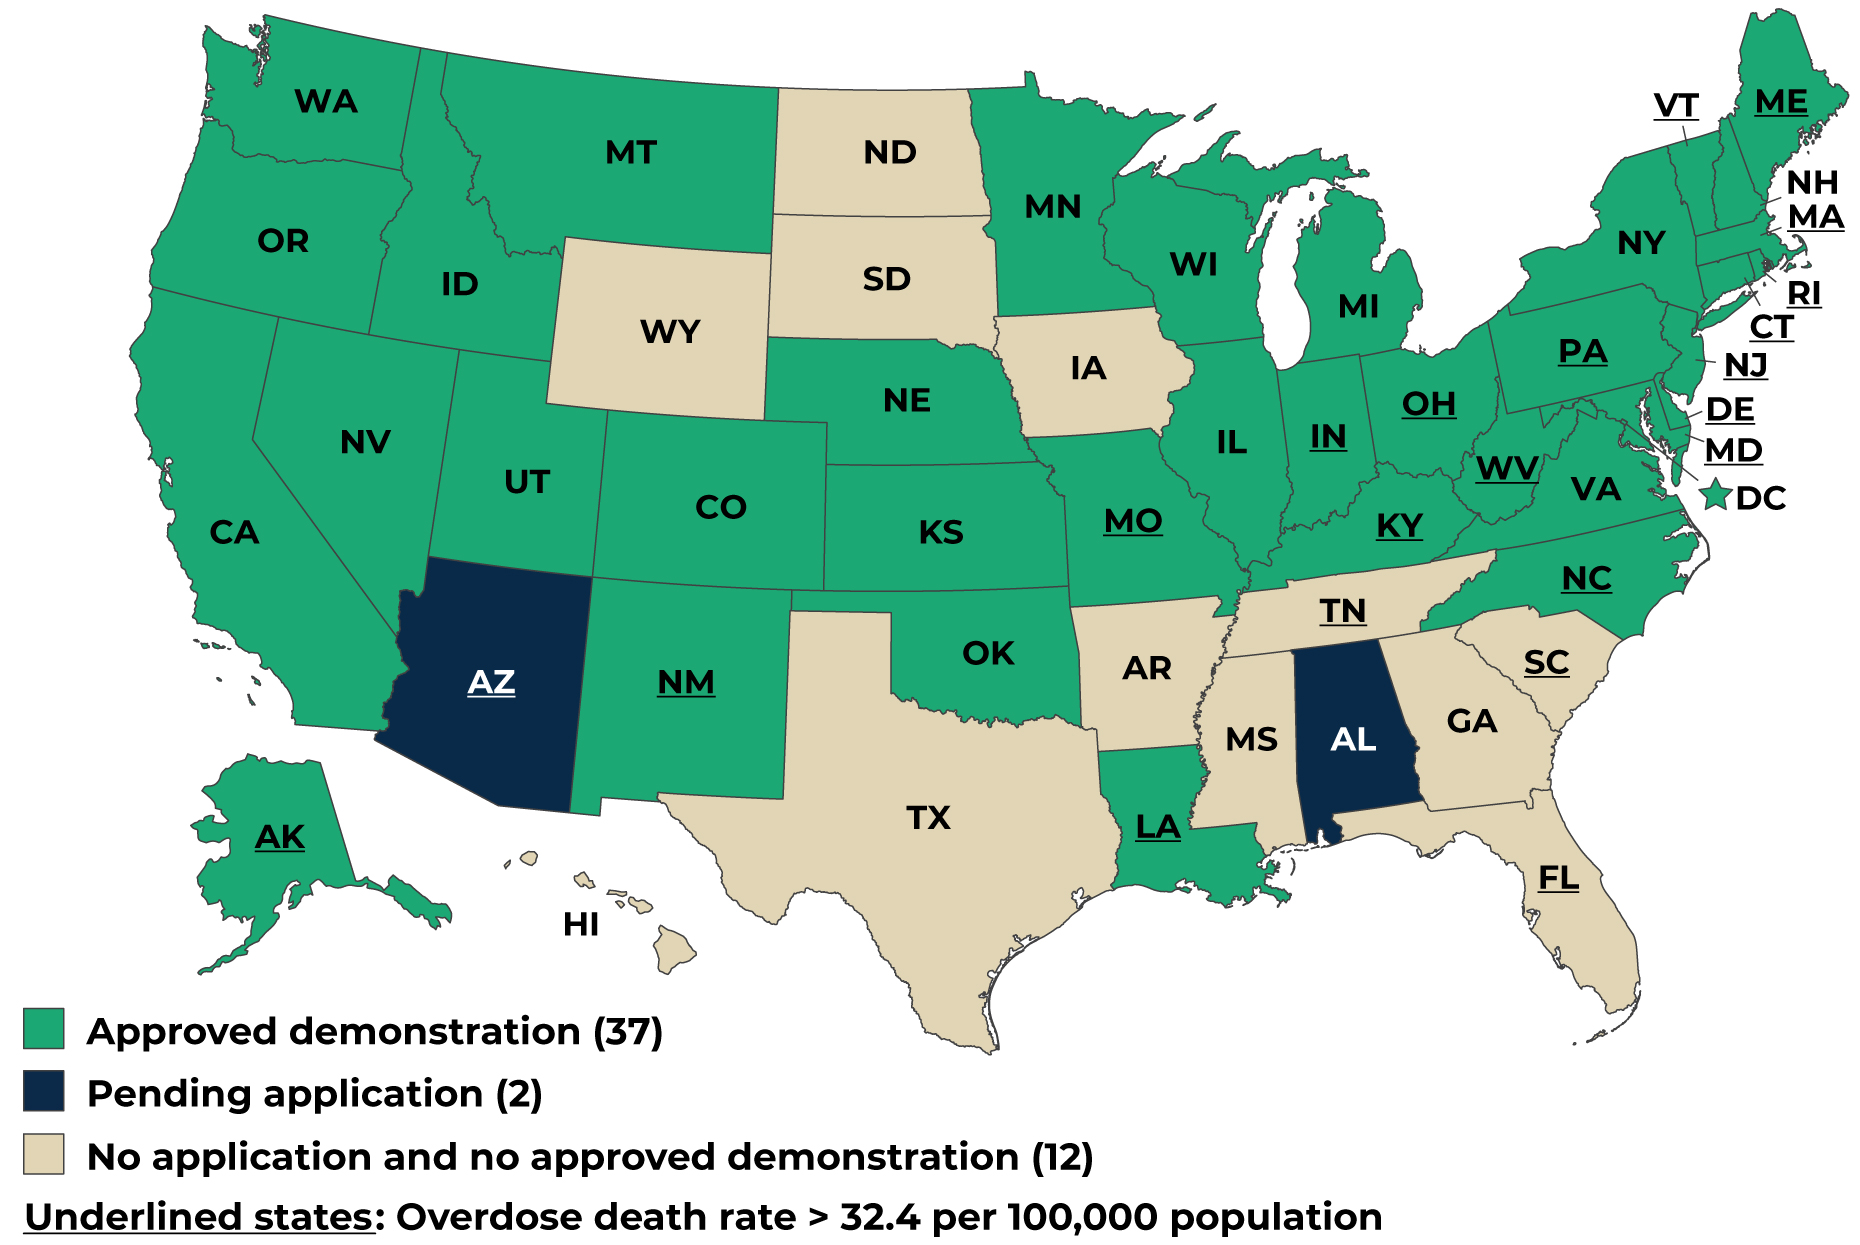 A map of the United States, showing that 26 states have an approved demonstration, 3 have a pending application, and 12 have no application and no approved demonstration. Several states are underlined to show their overdose death rate is above 32.4 per 100,000 population. 